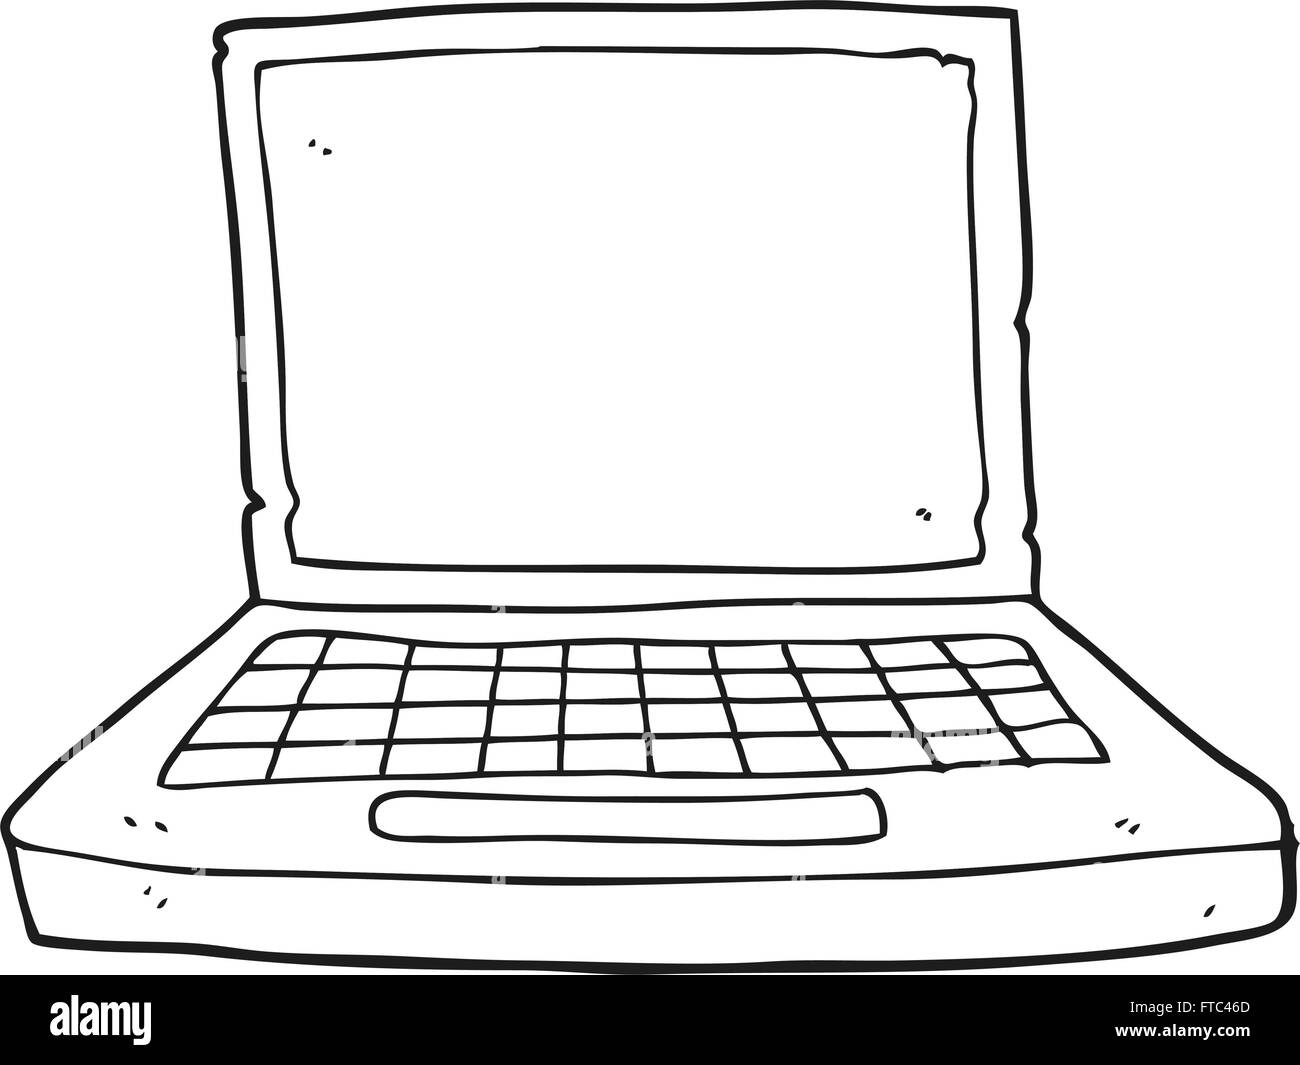 Freehand Drawn Black And White Cartoon Laptop Computer Stock